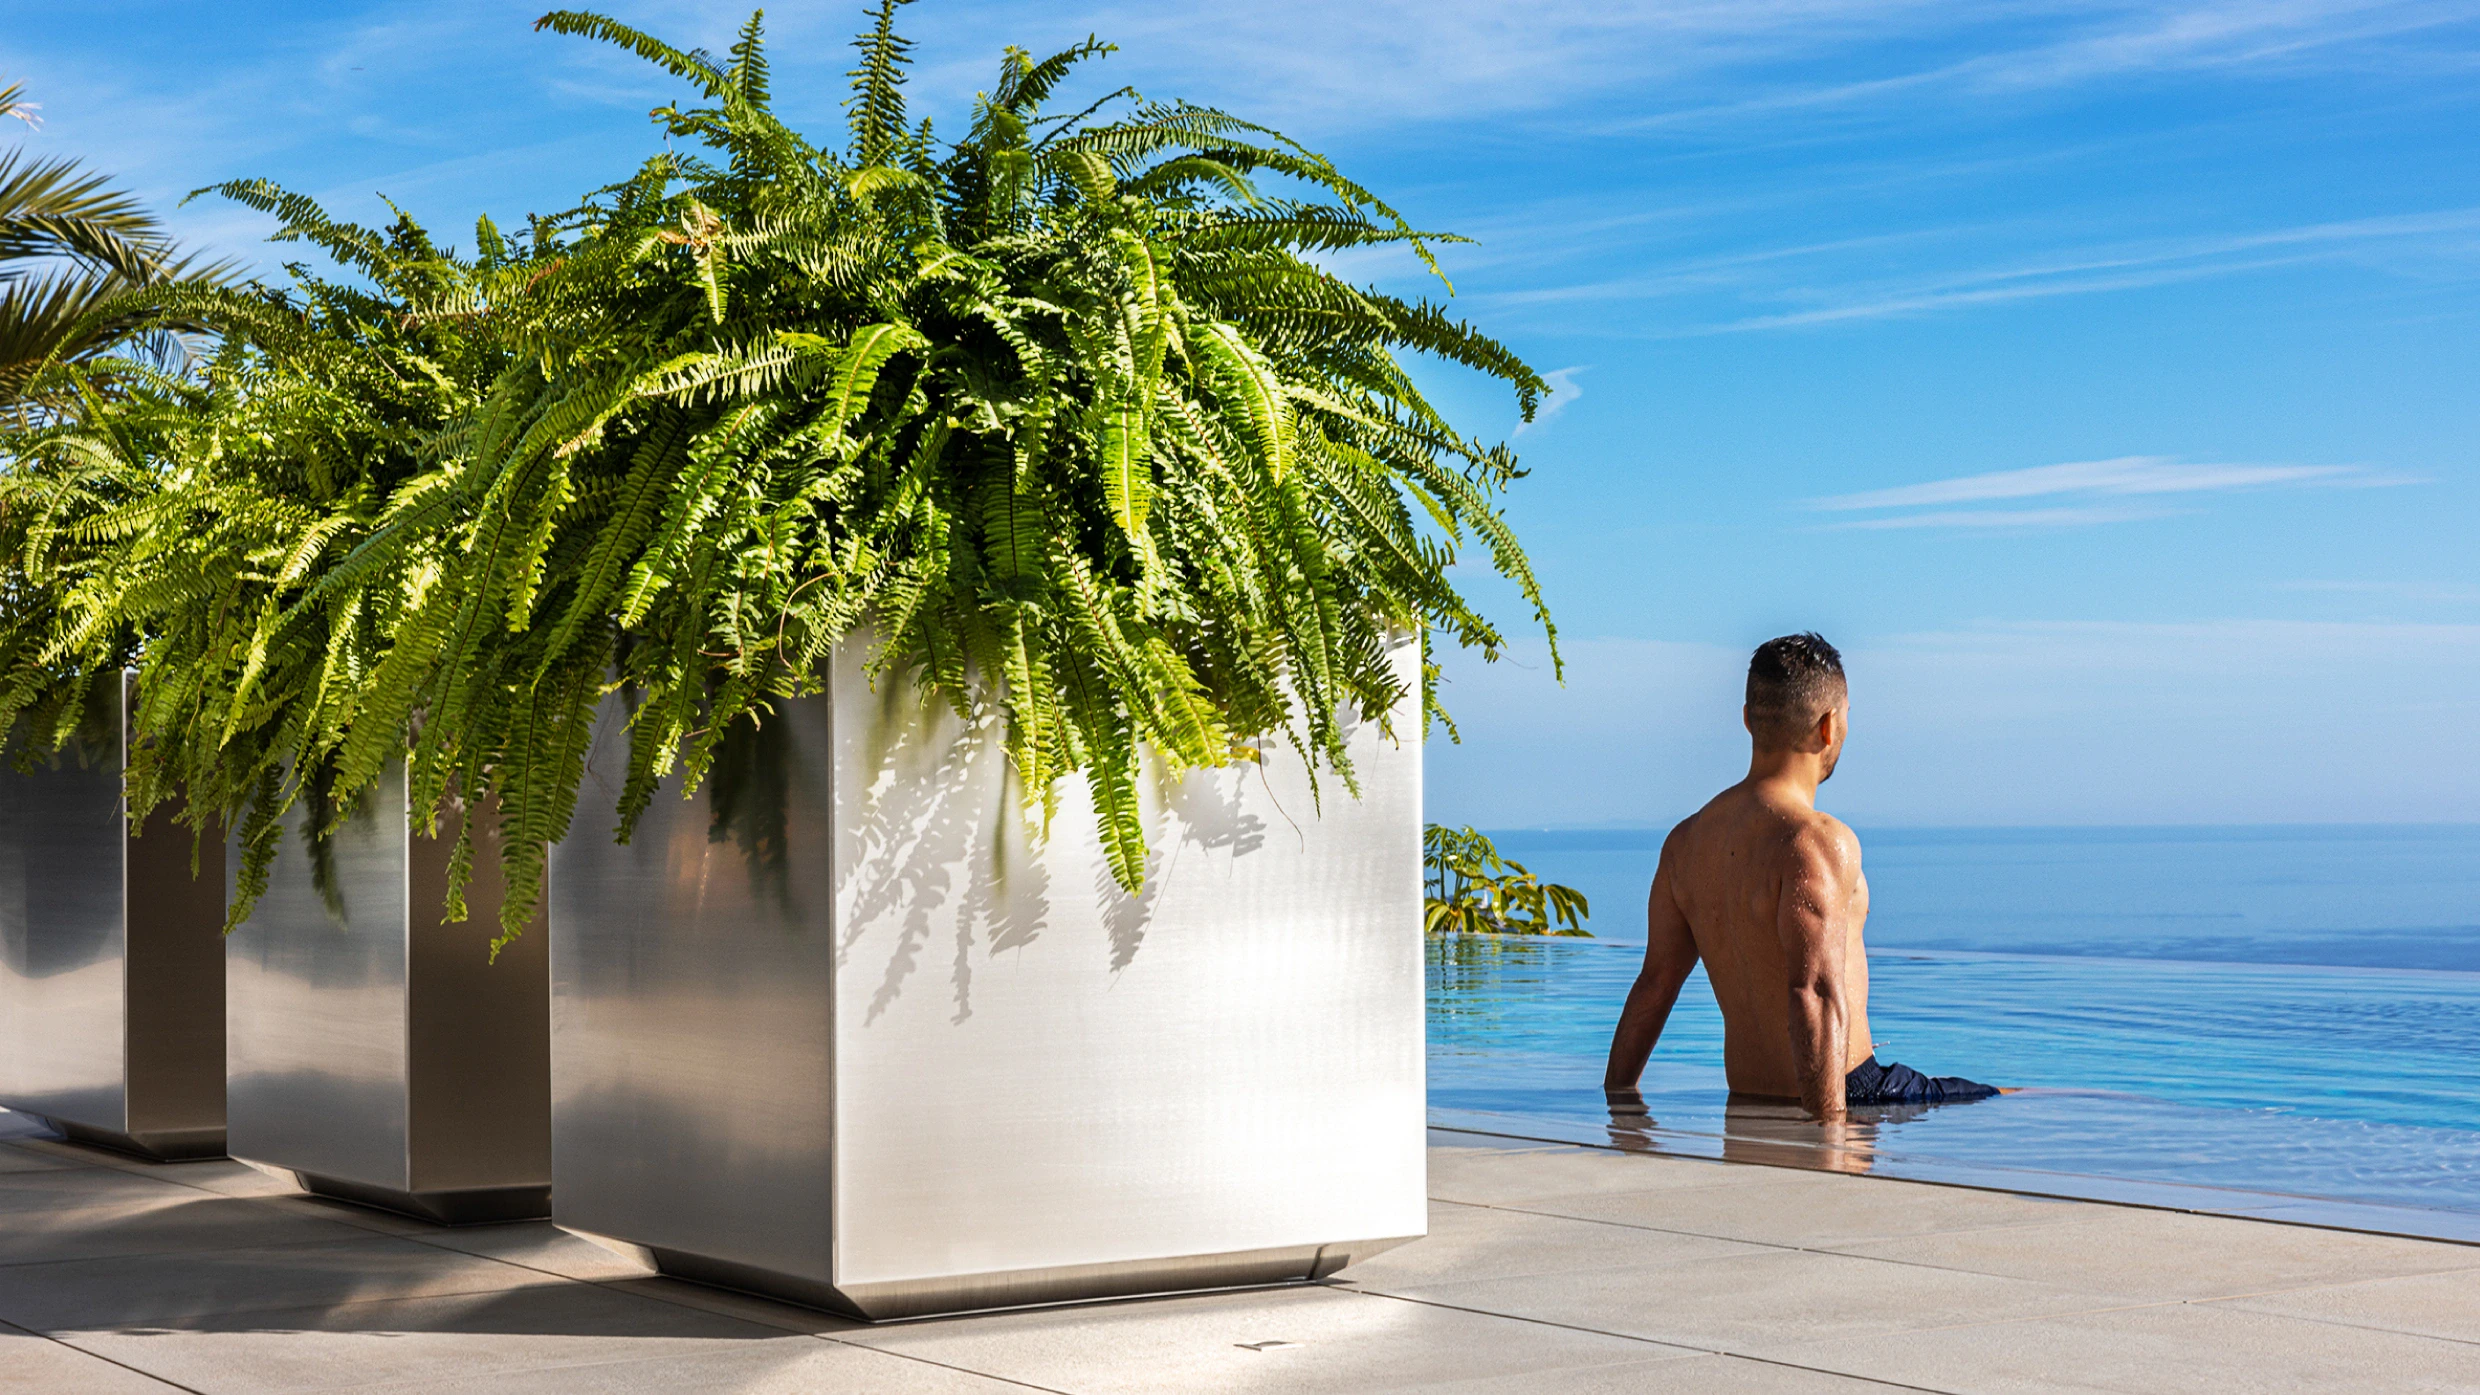 stainless steel outdoor planters